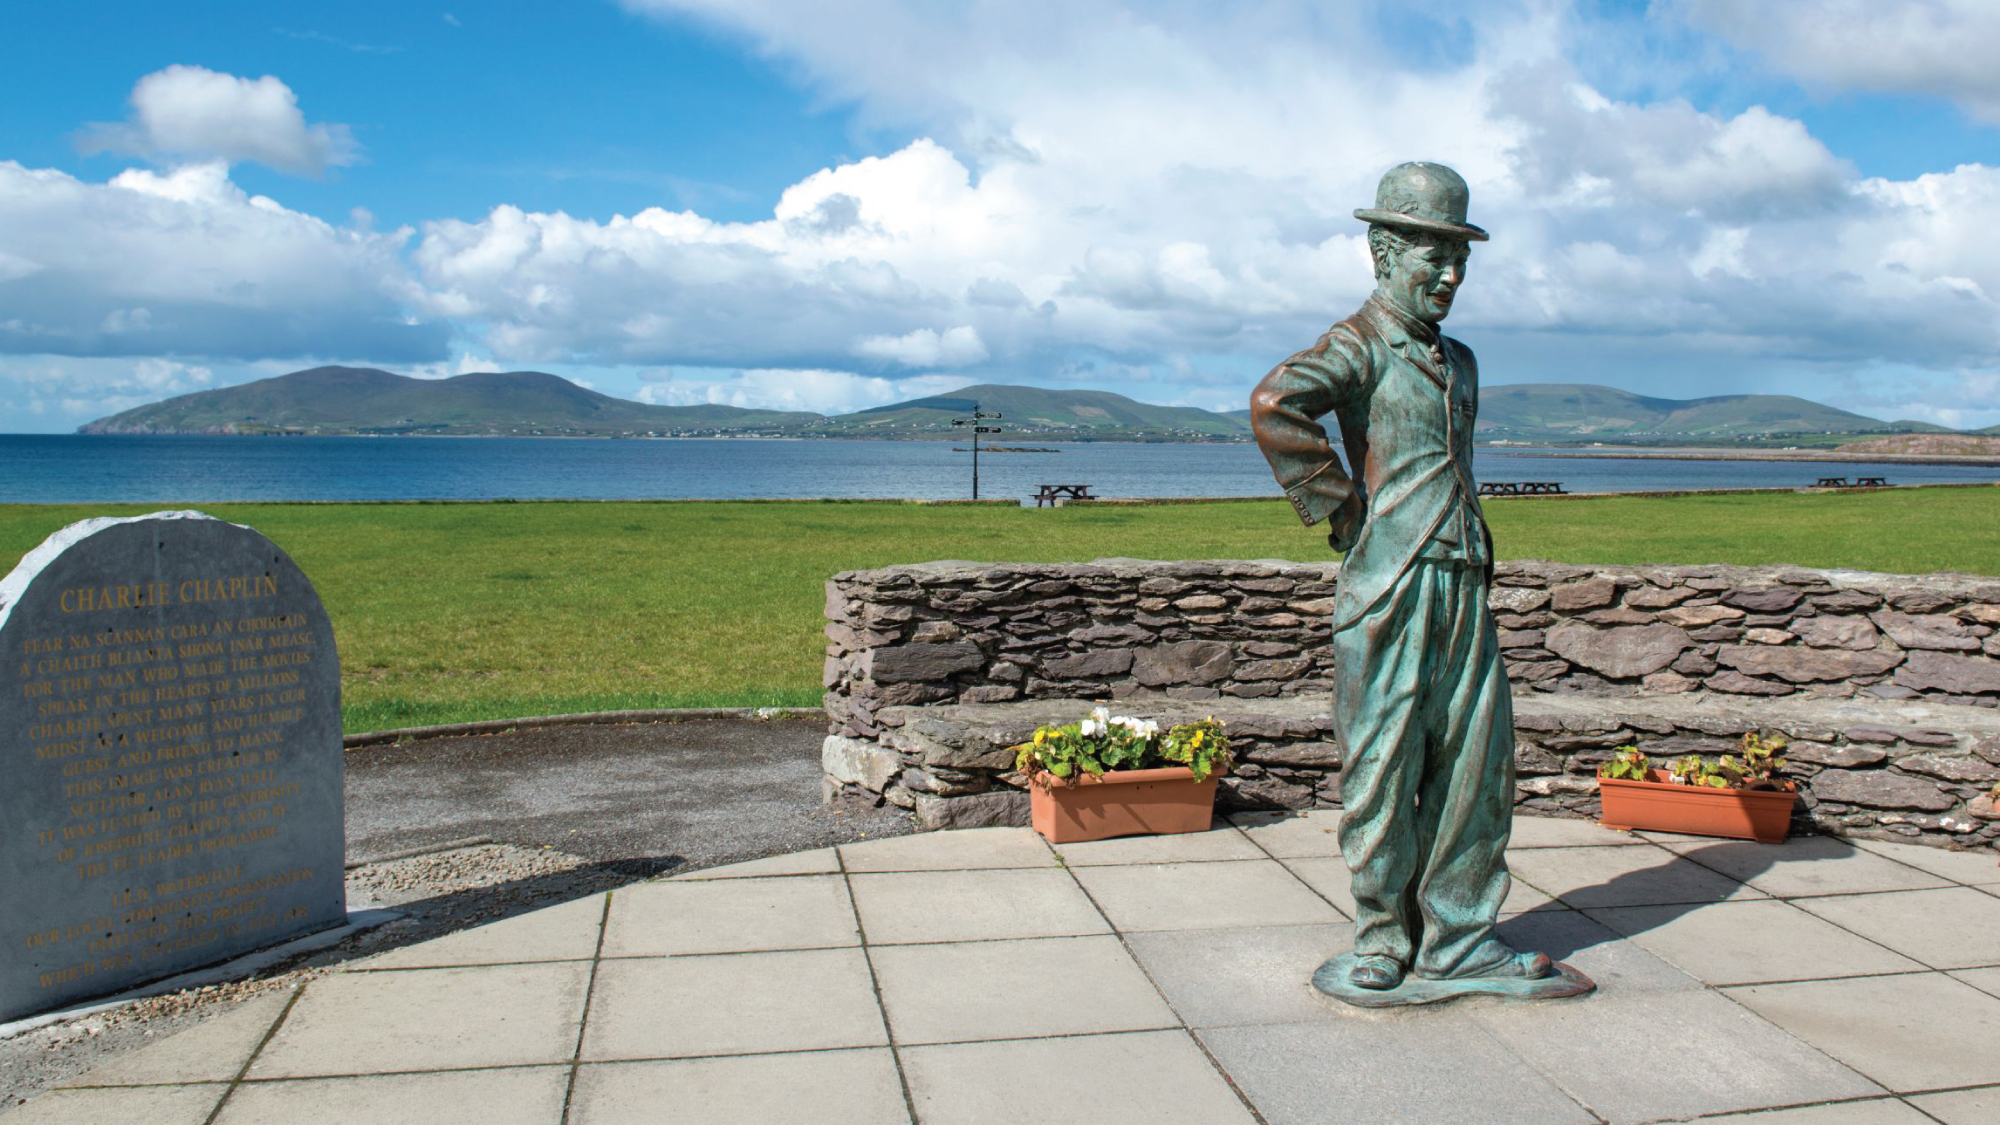 iconic Charlie Chaplin Monument in Kerry, Ireland, celebrating the legendary actor's connection to the region.